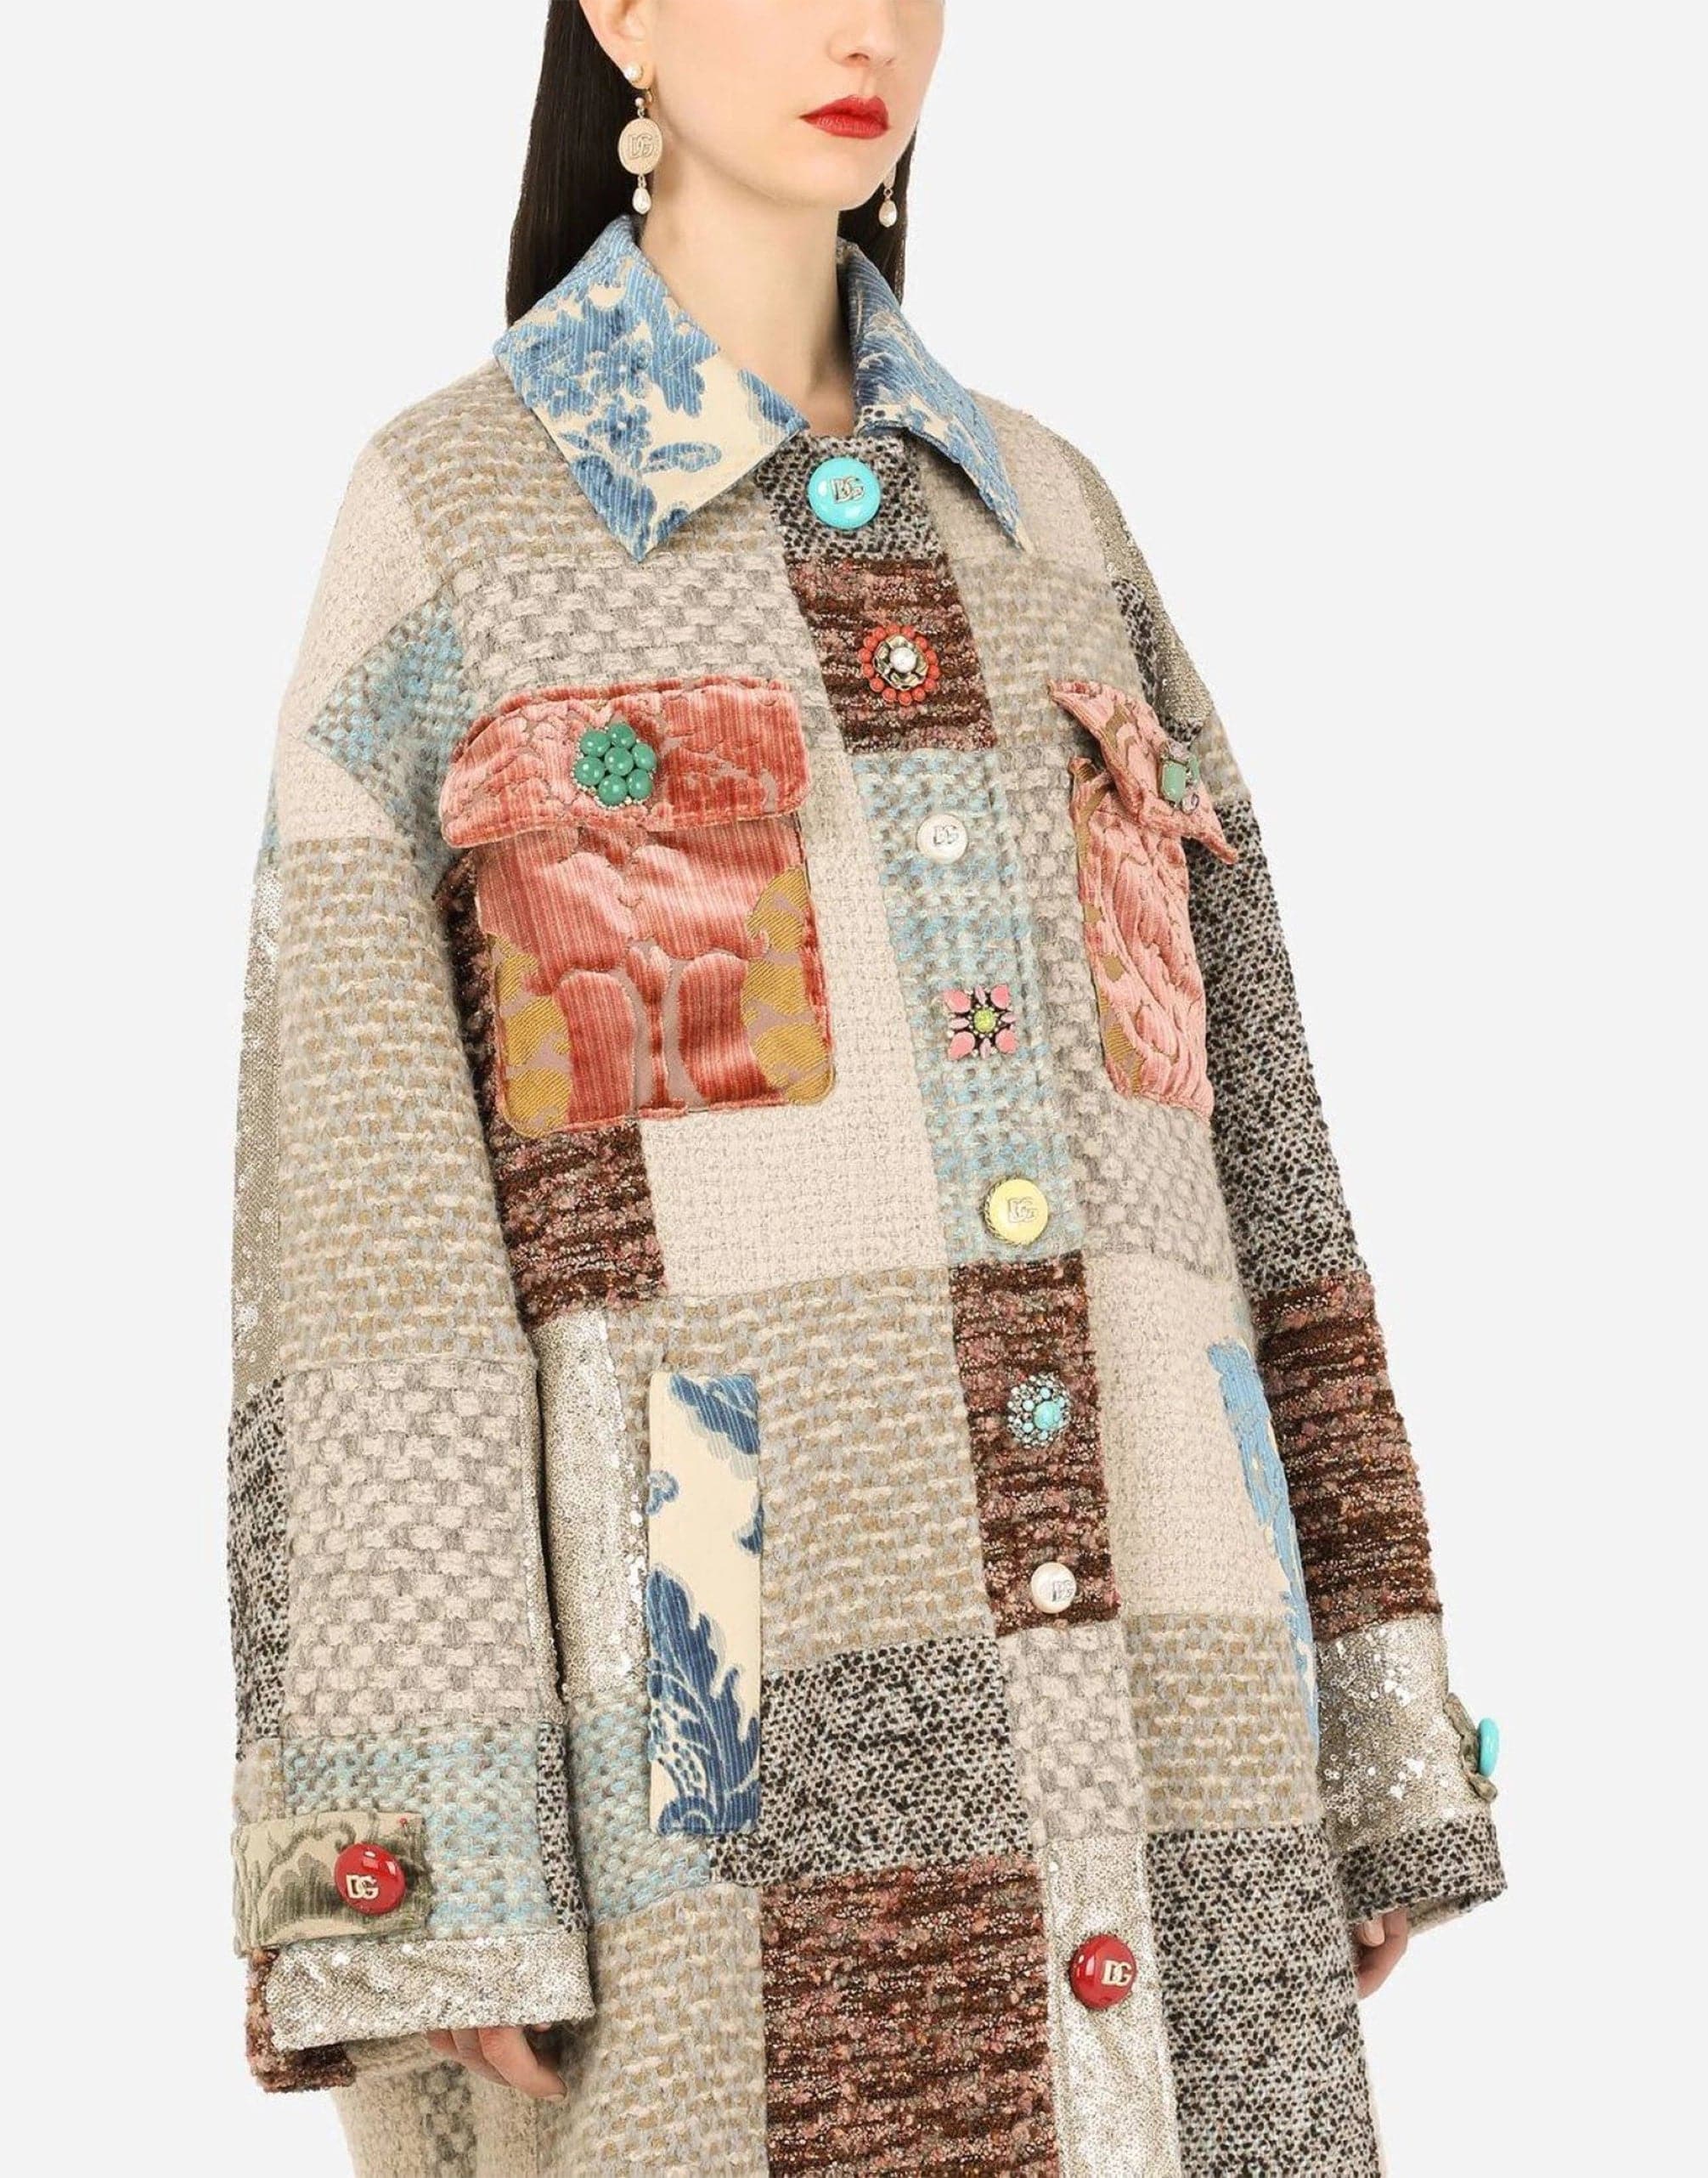 Dolce & Gabbana Patchwork Tweed Coat With Bejeweled Embellishment